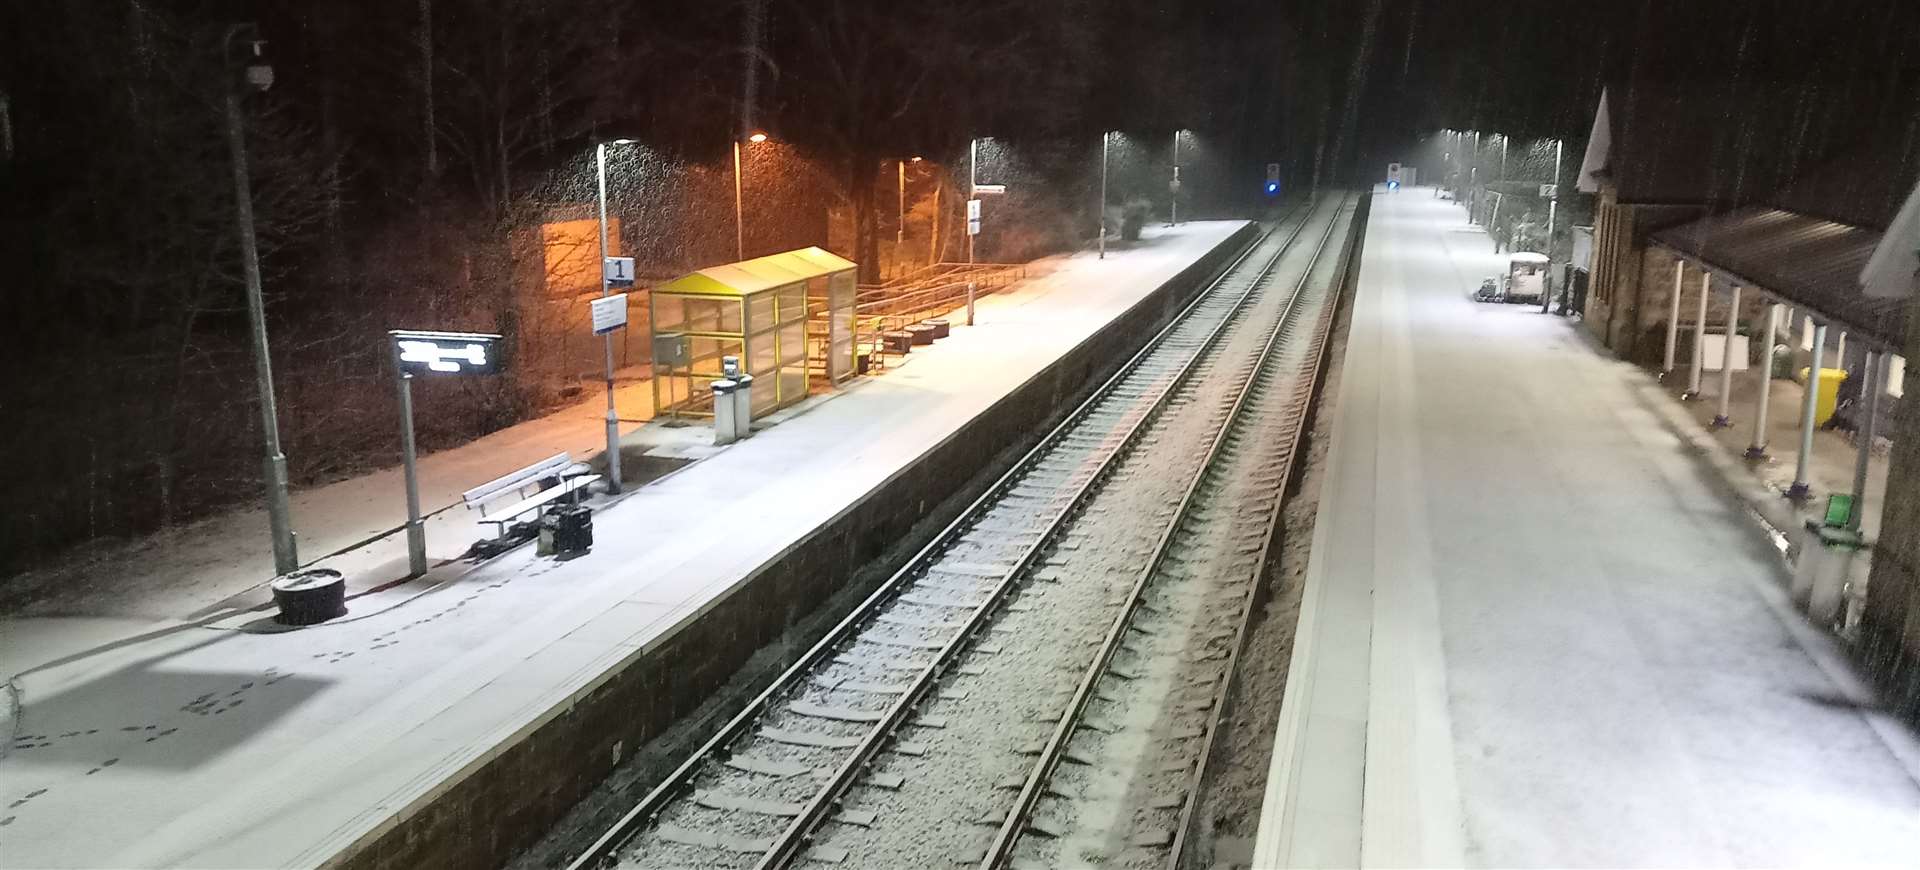 Tain Station in the snow